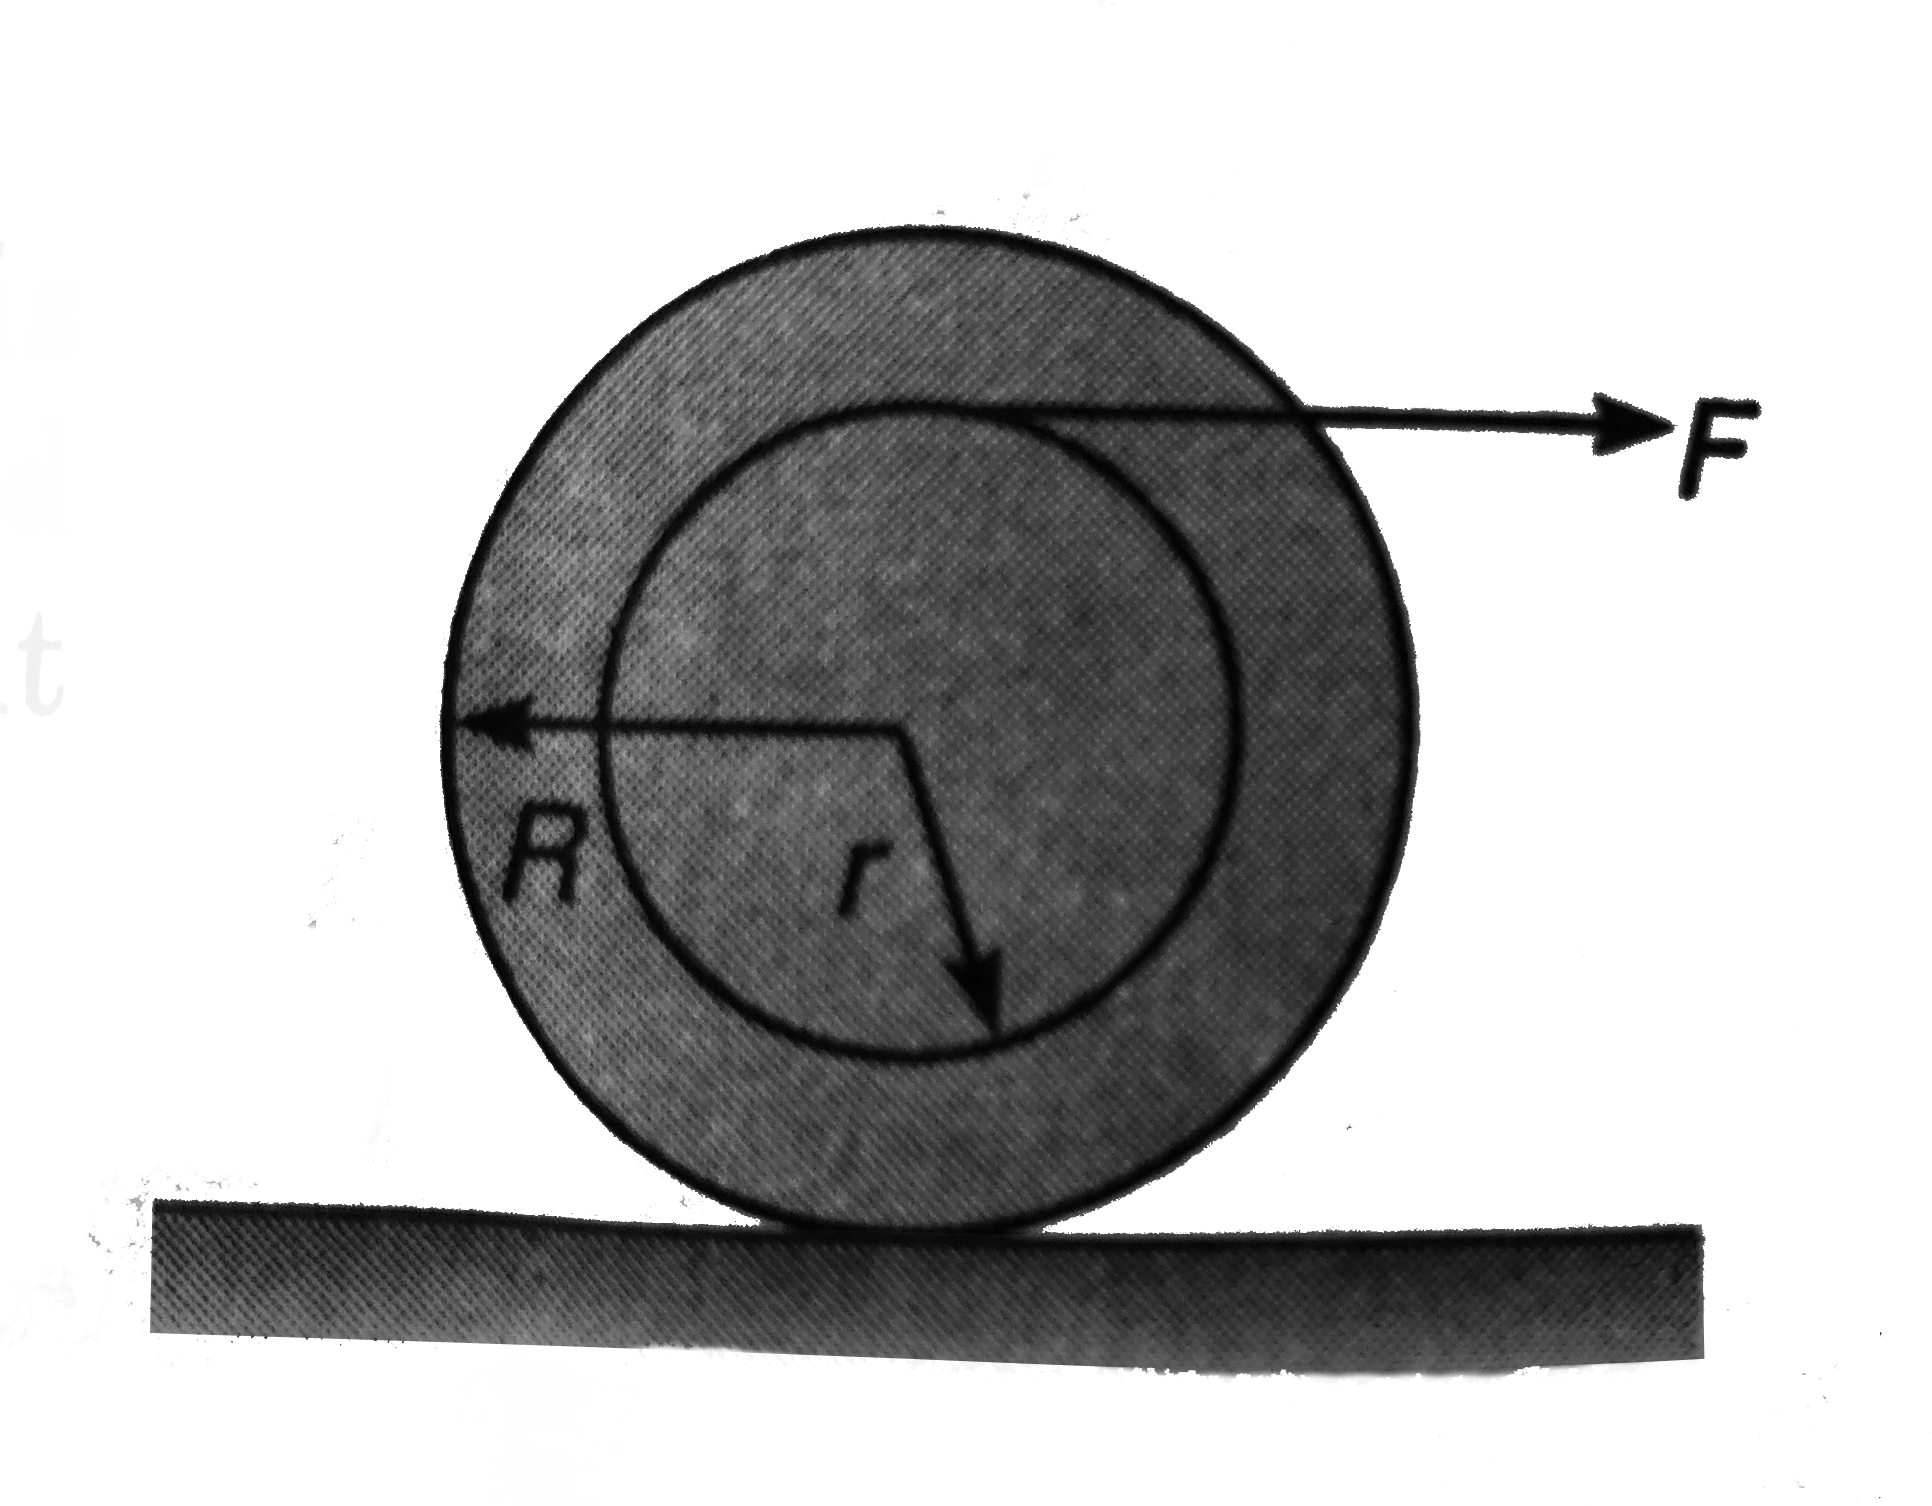 A heavy homogeneous cyliner has mass m and radius R. It is accelerated by a force F which is applied through a rope wound around a light drum of radius r attached to the cylinder (figure) the coefficient of static friction is sufficient for the cylinder to roll without slipping.